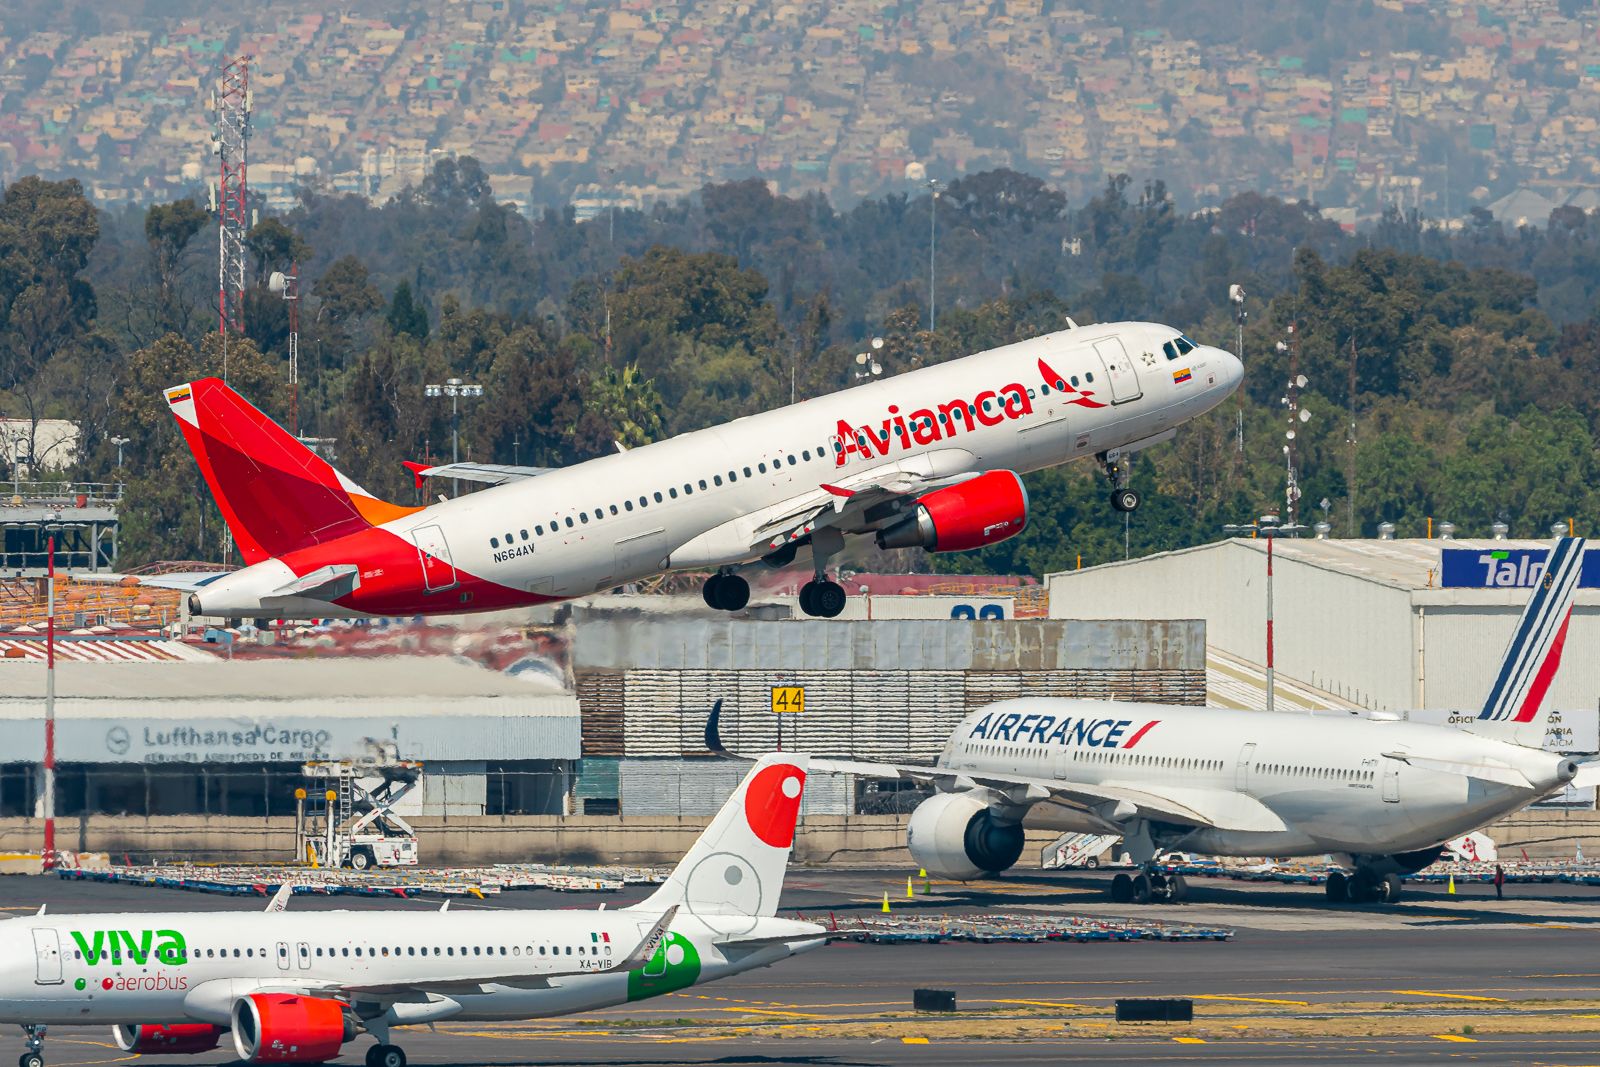 An Avianca Airbus A320 departing from Mexico City.